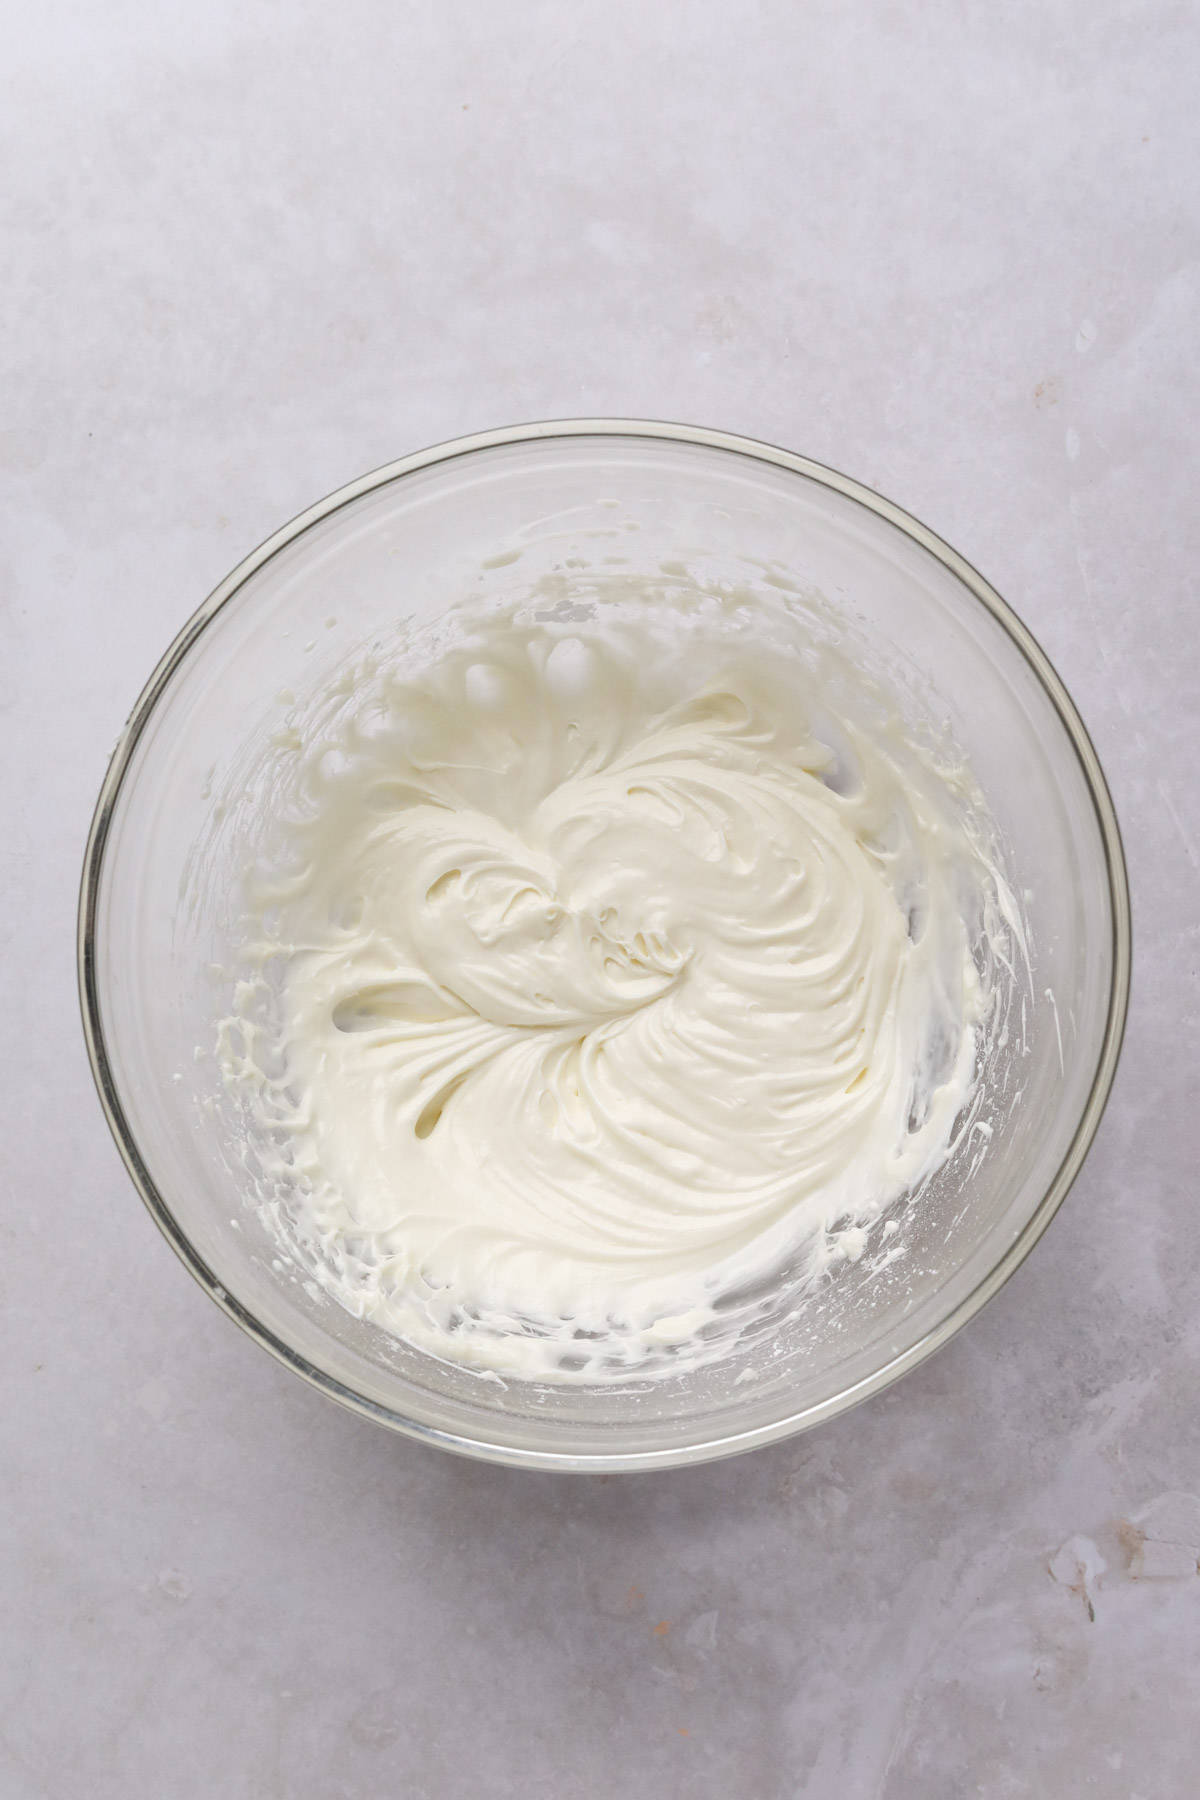 Mixed cream cheese glaze in a glass mixing bowl.